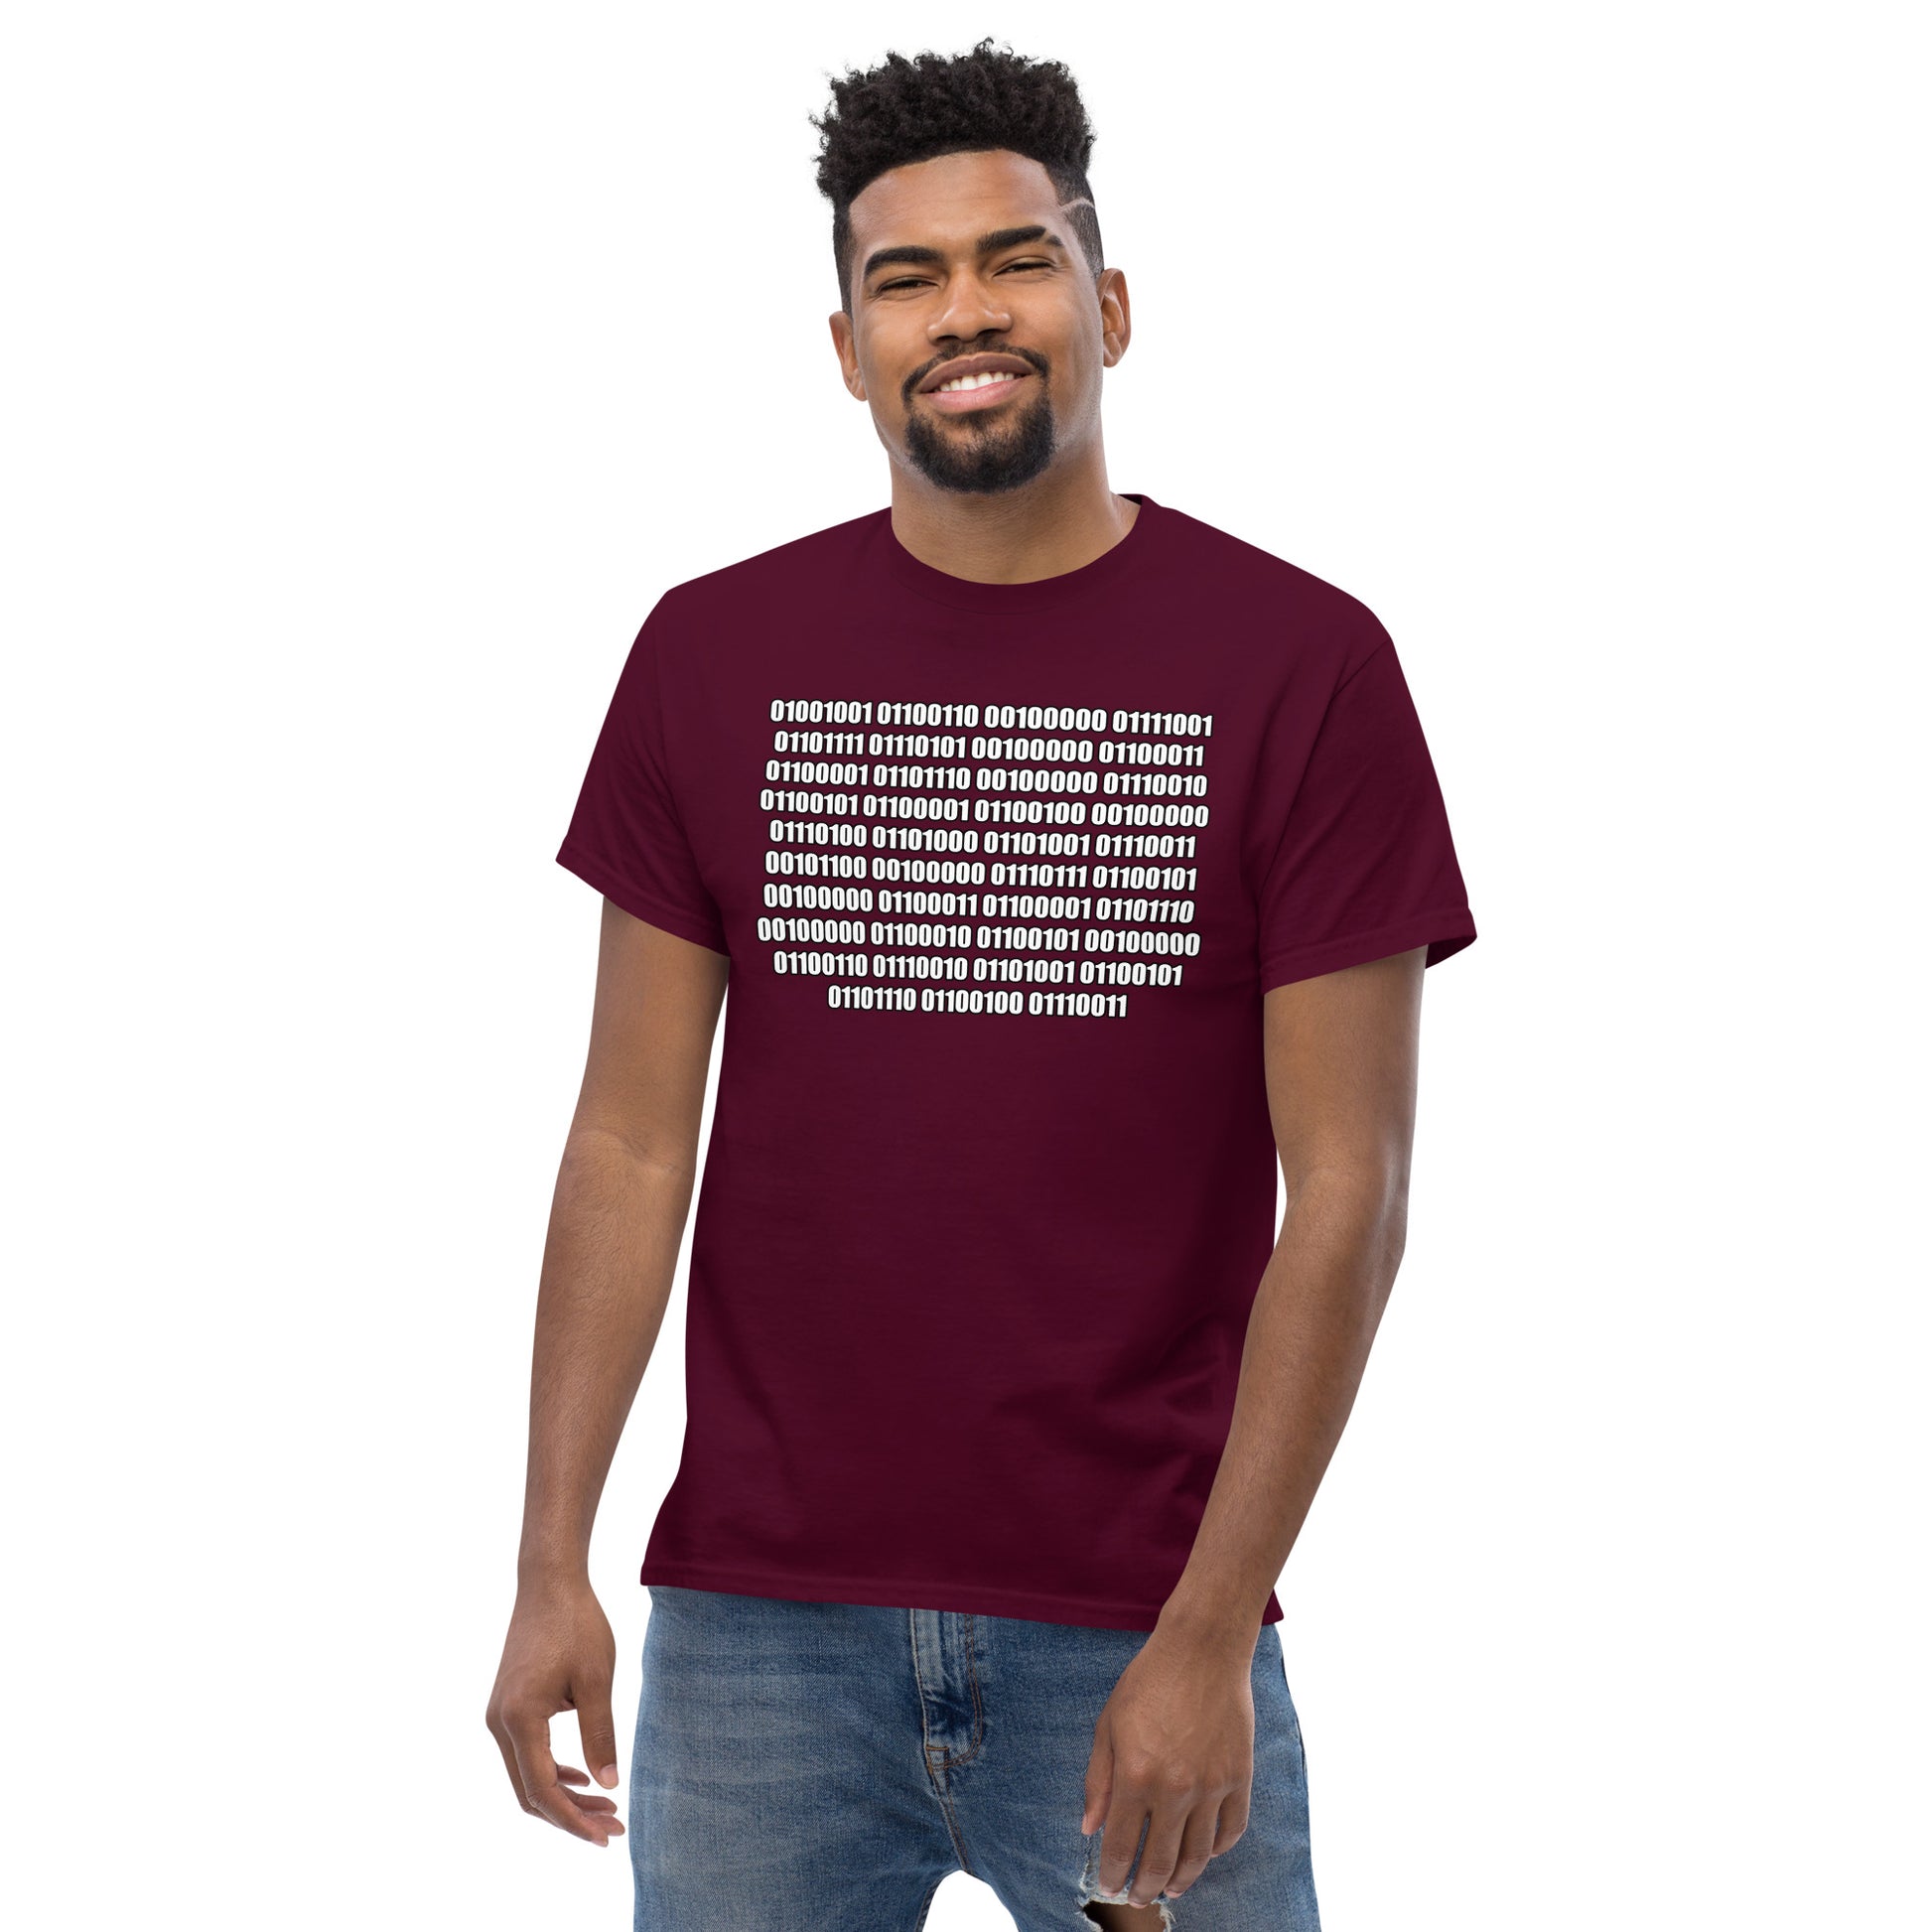 Men with maroon t-shirt with binaire text "If you can read this"